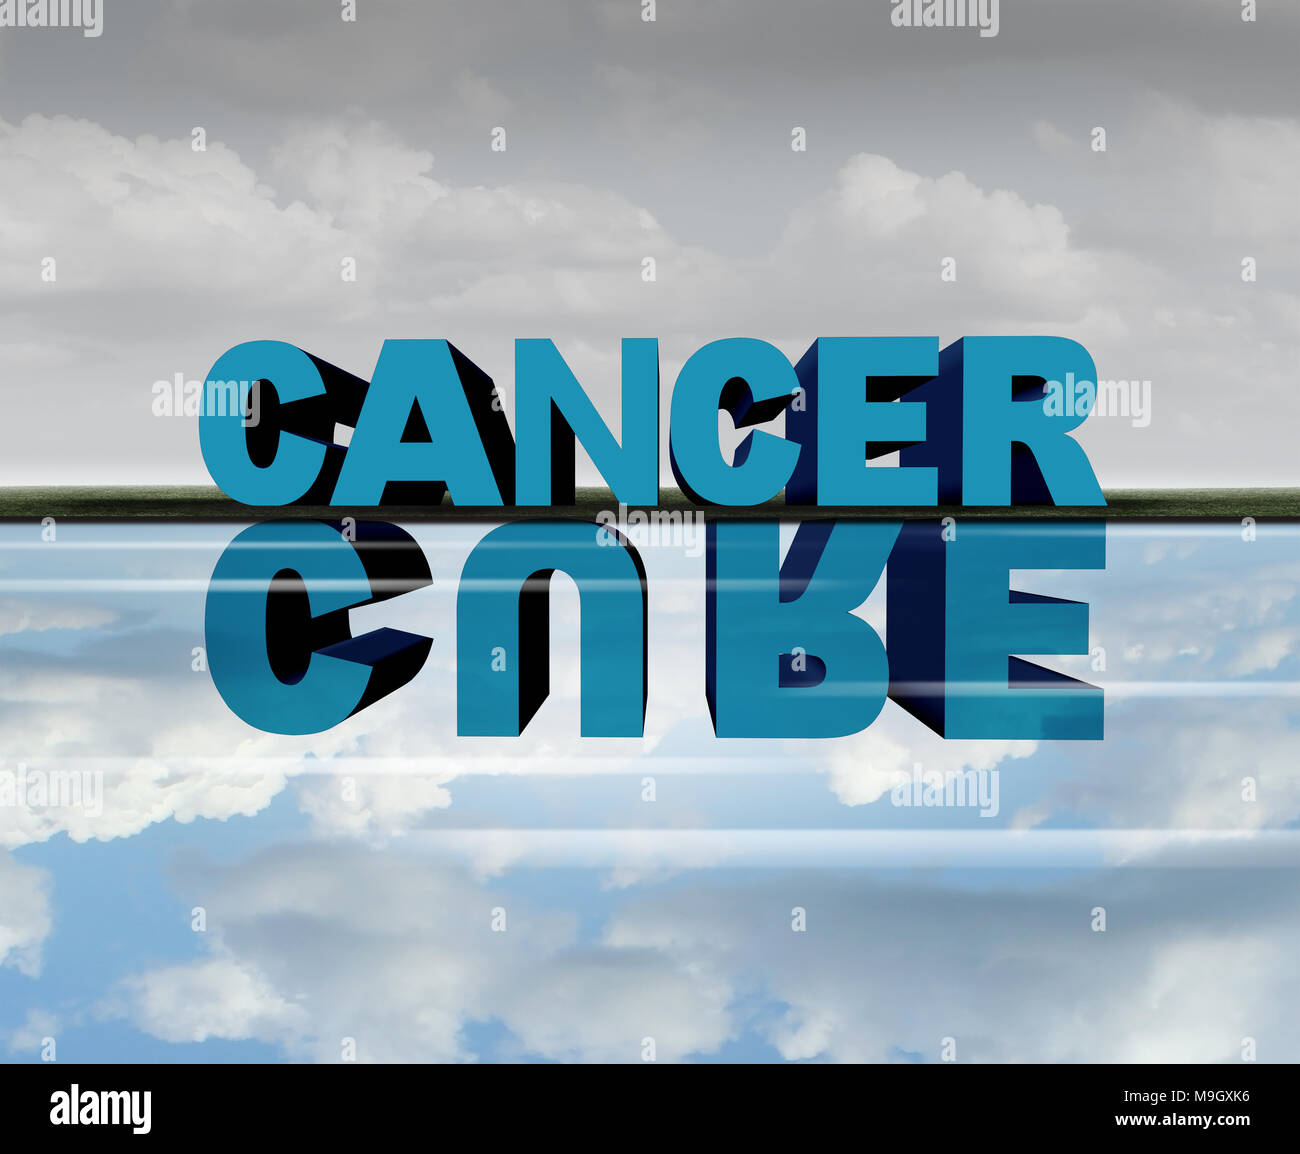 Cancer cure medical treatment success concept as text with a reflection representing medicine research success. Stock Photo